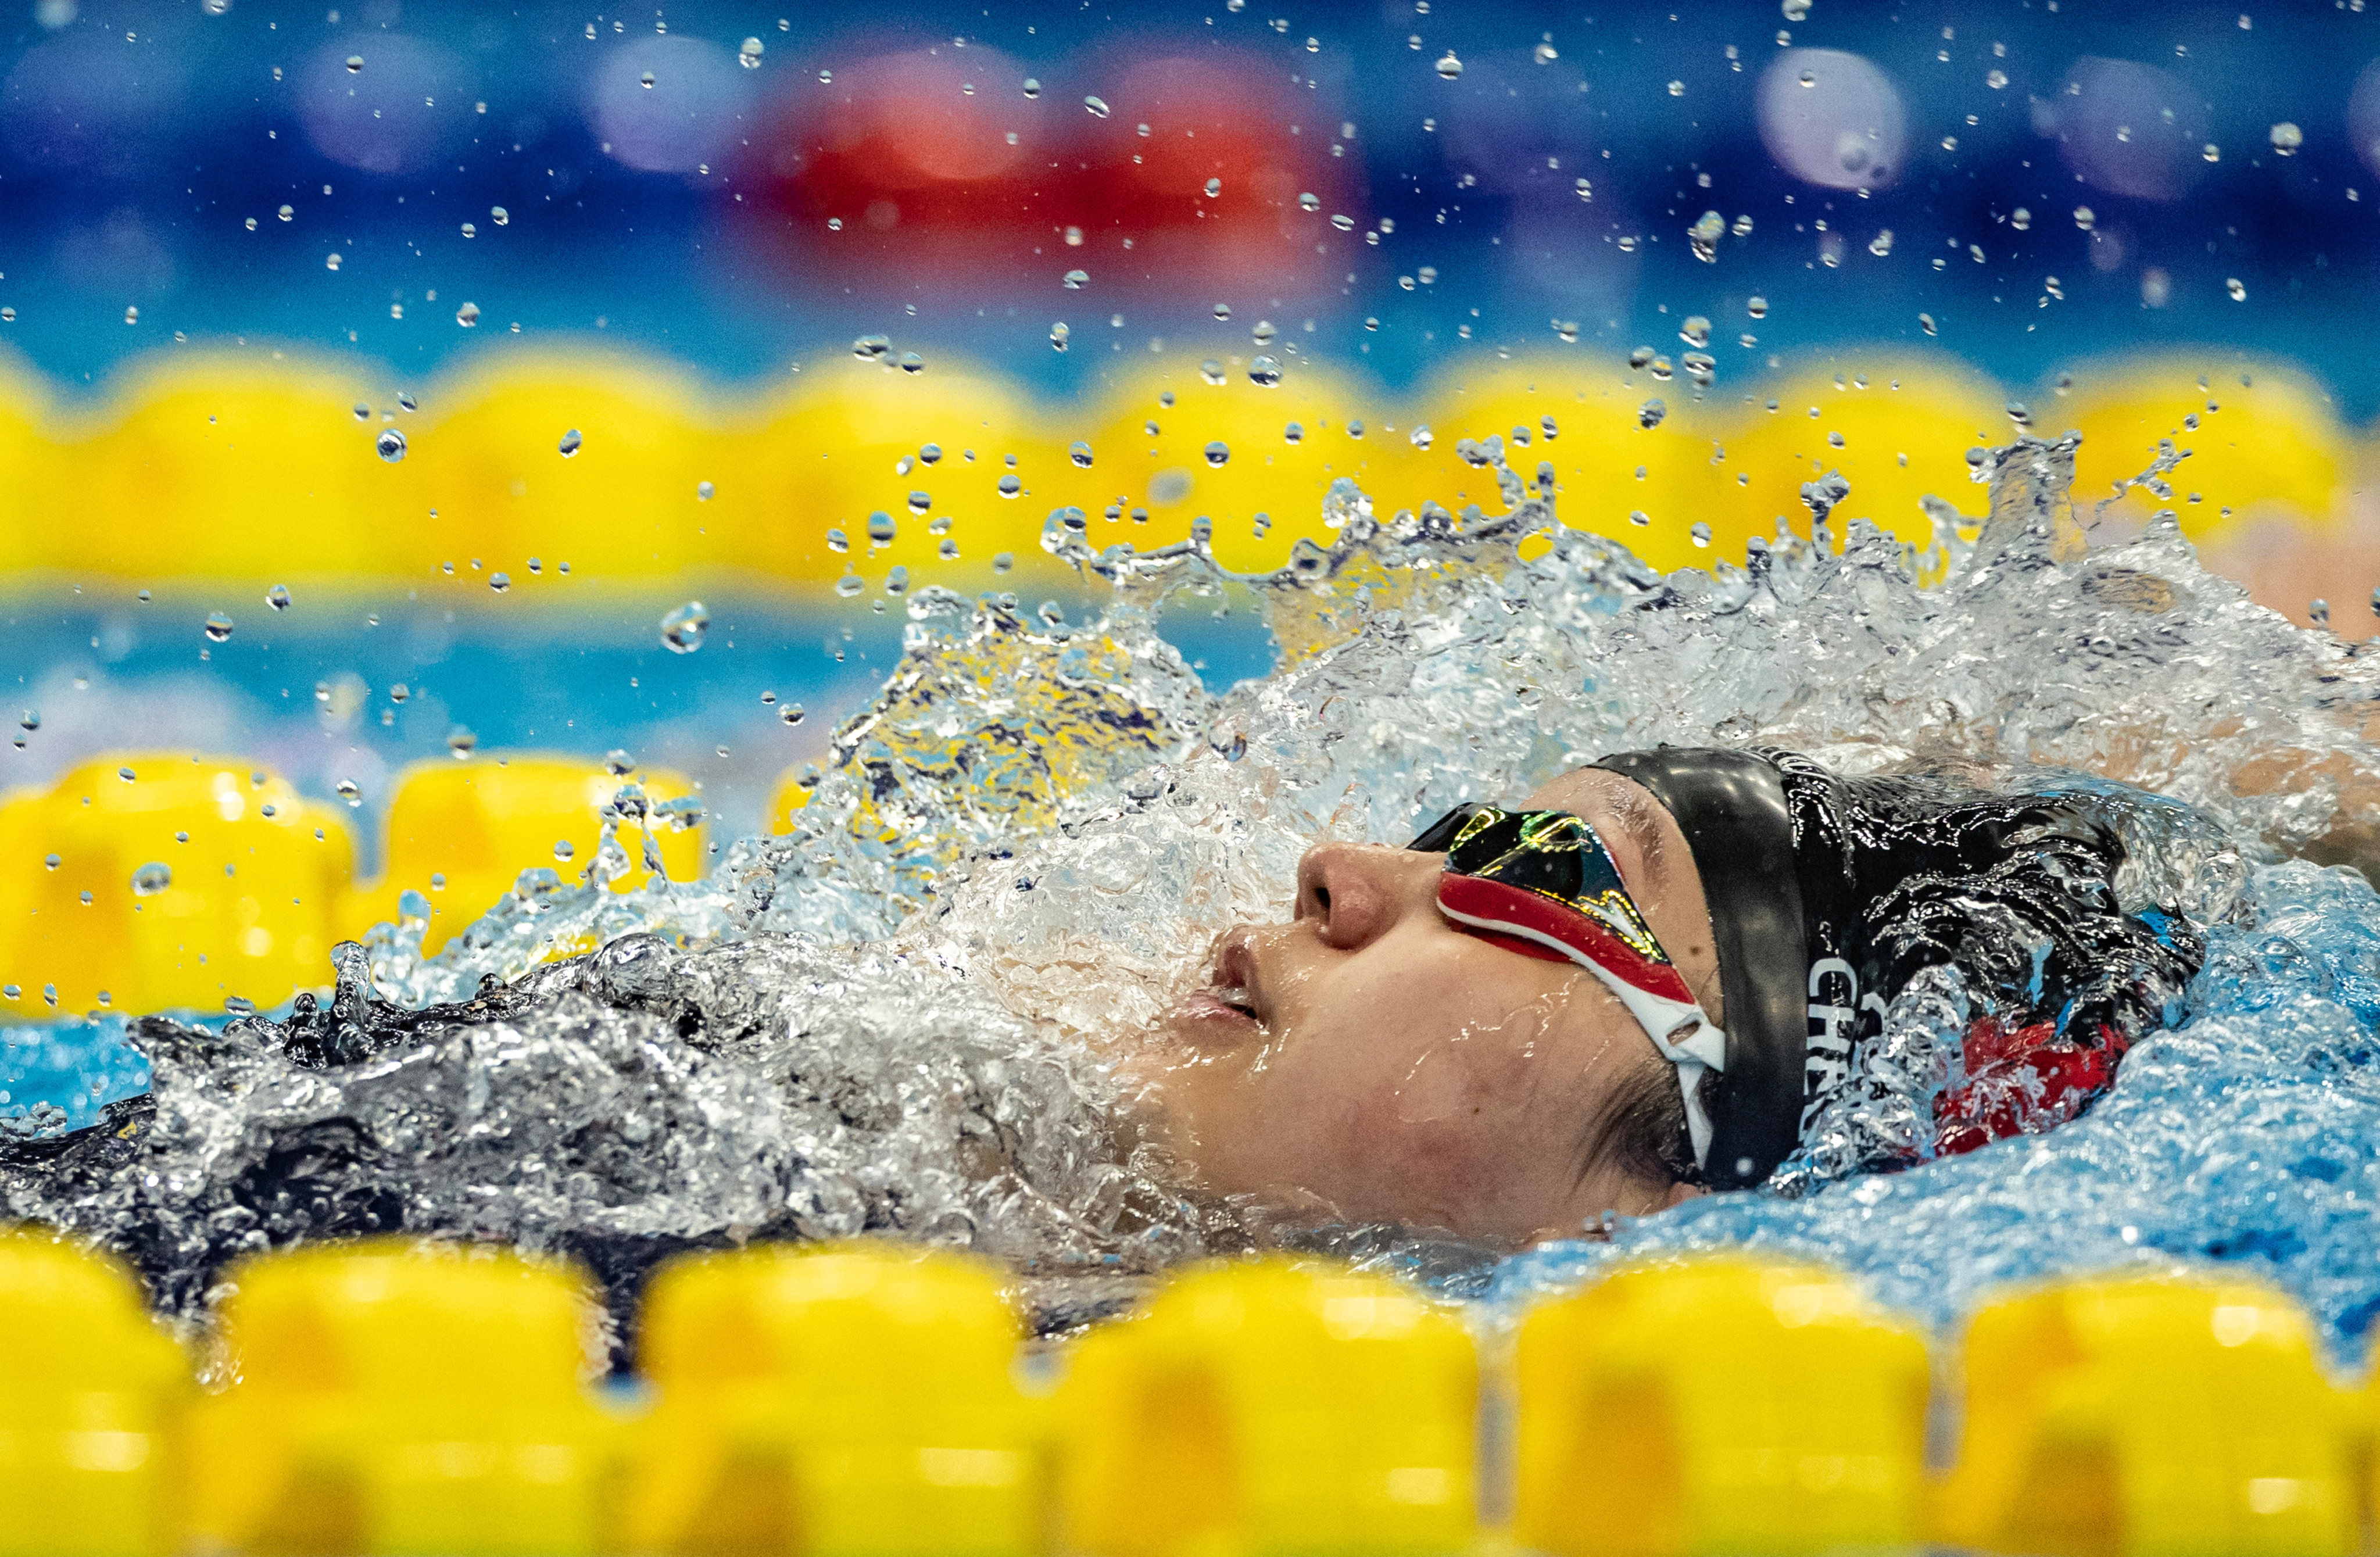 Cindy Cheung reaches the 200m backstroke final after a two minutes 14.69 seconds qualifying time. Photo: Reuters